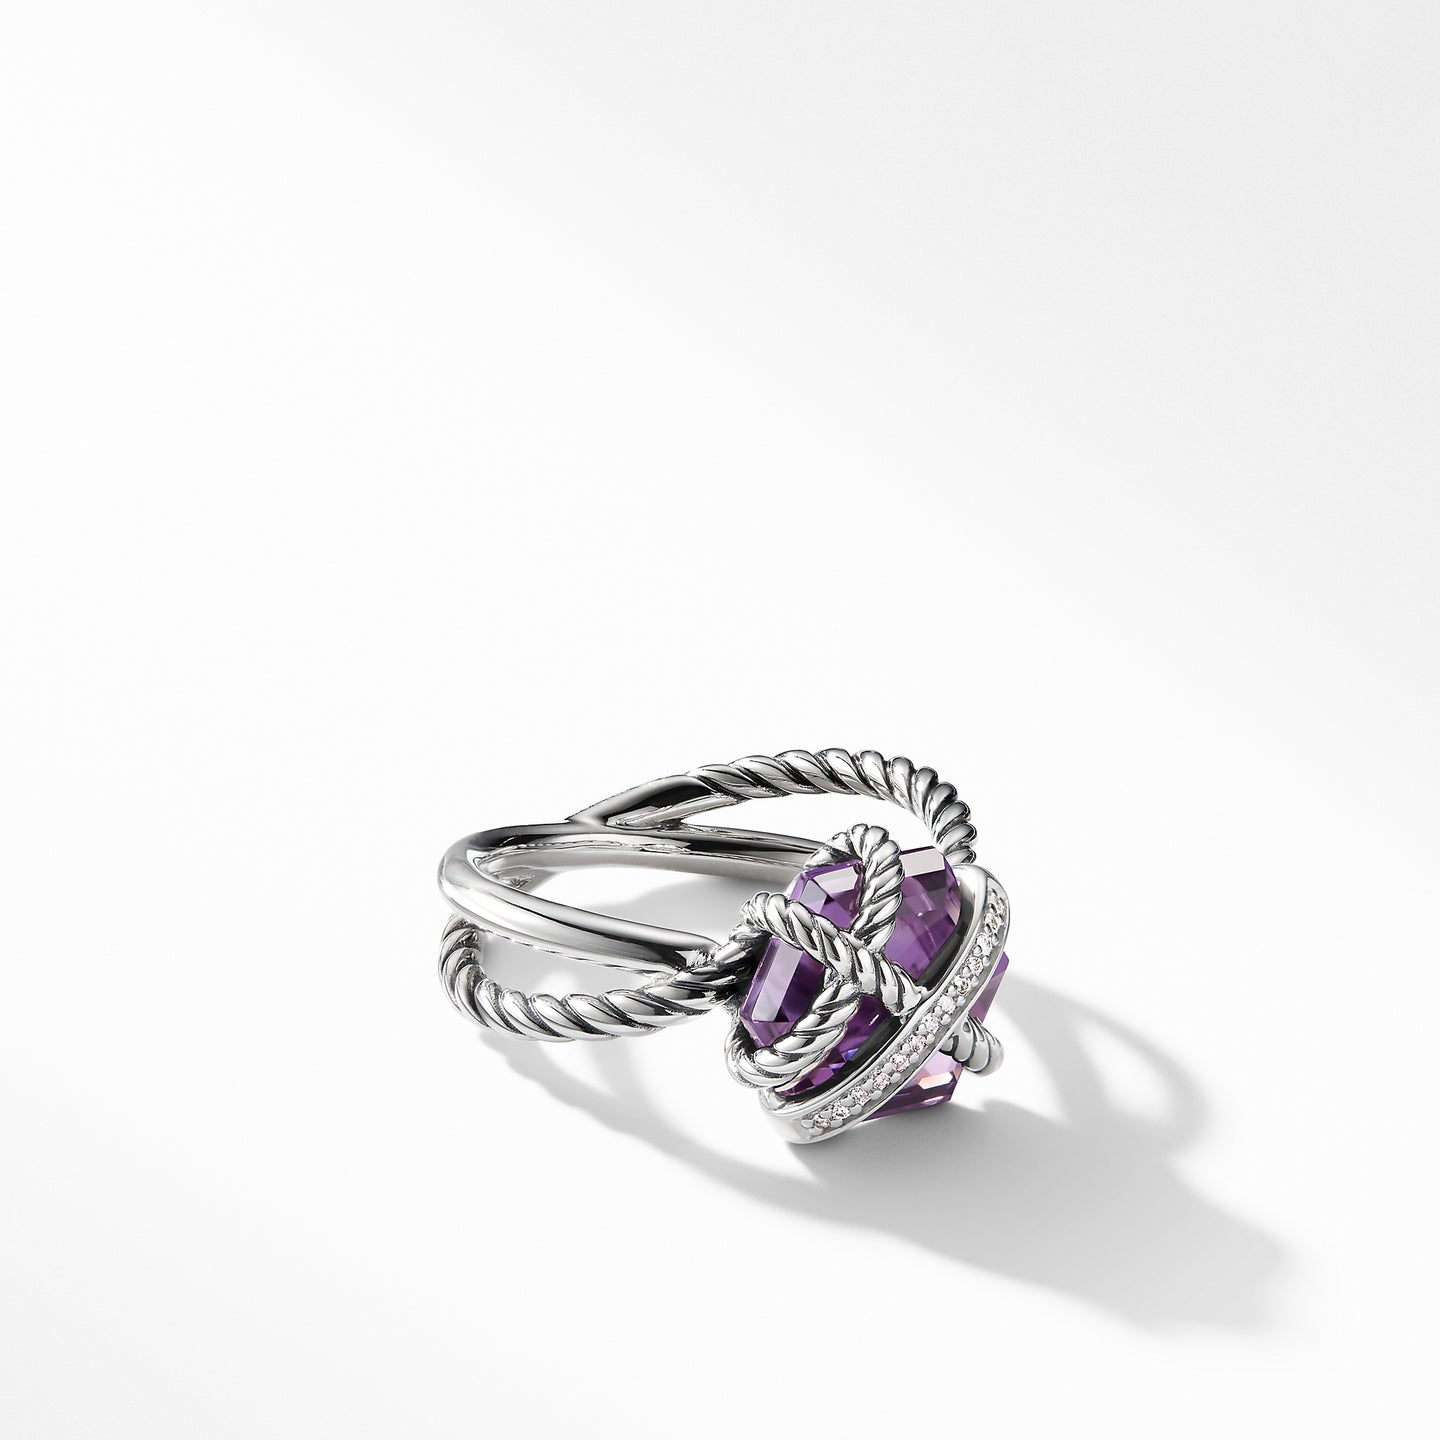 Ring with Amethyst and Diamonds, Size 6